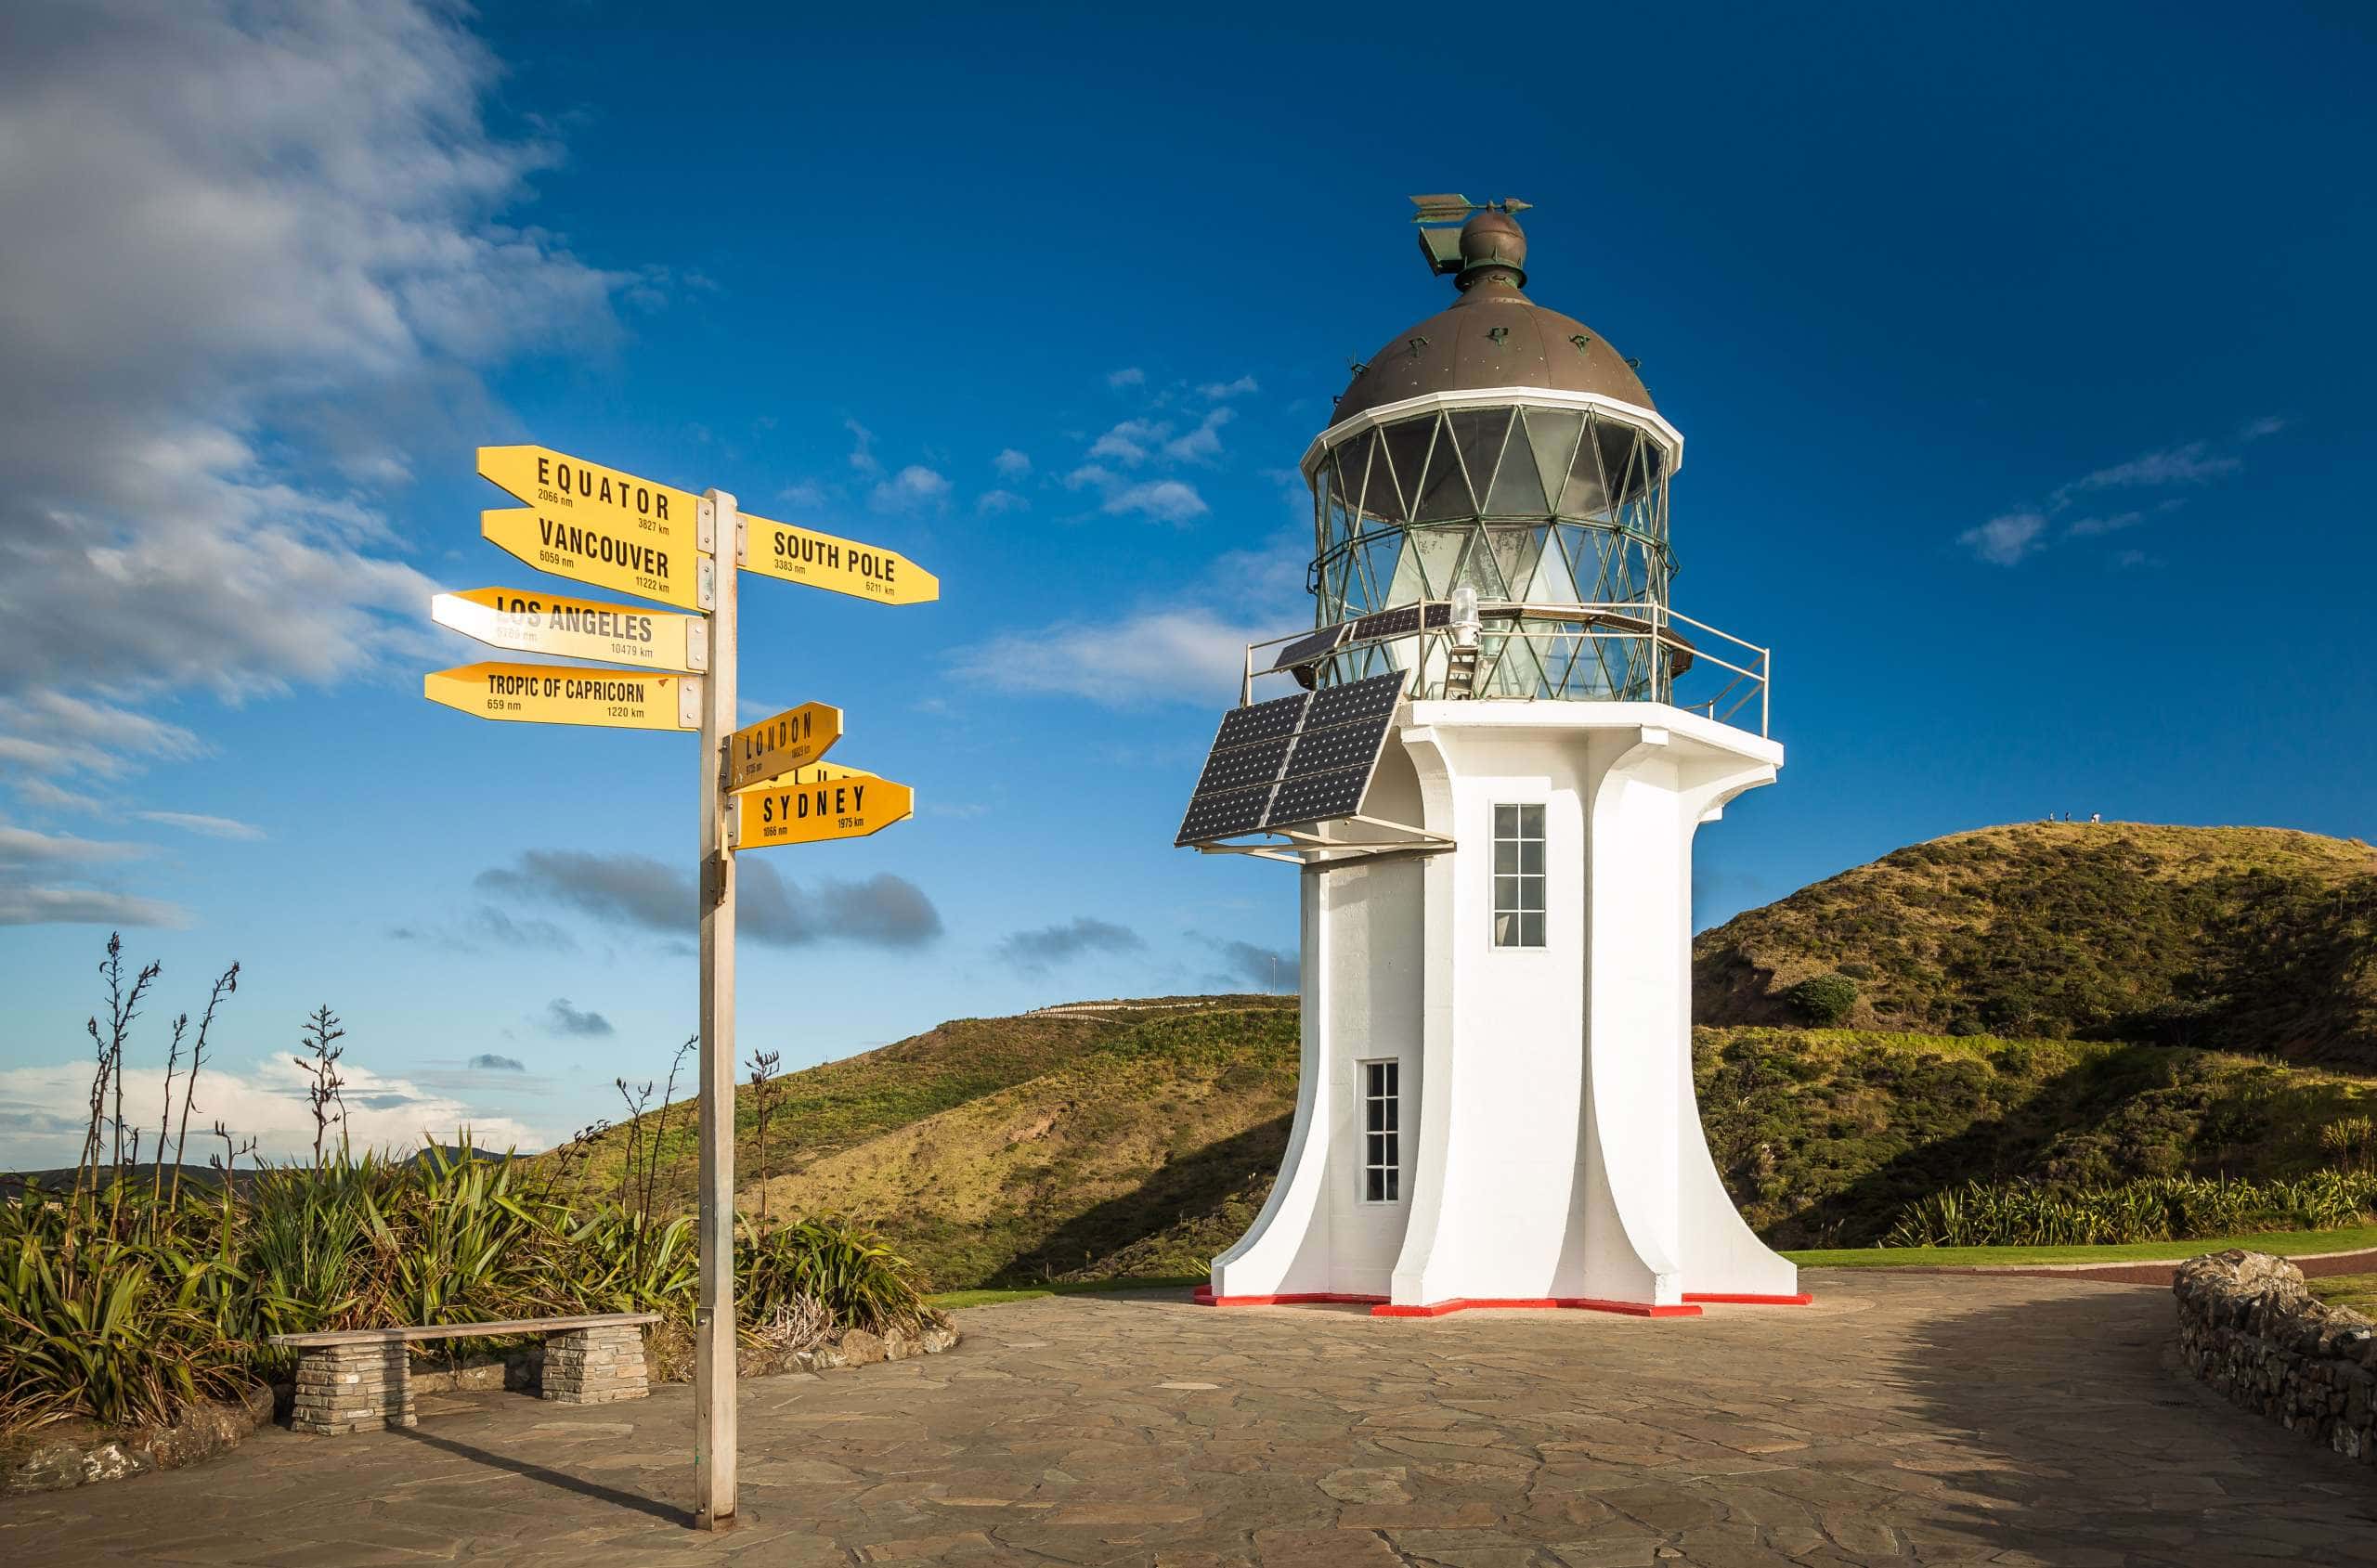 Image of Cape Reinga Lighthouse, north edge of New Zealand accompanying family law article "Child support arrangements with New Zealand